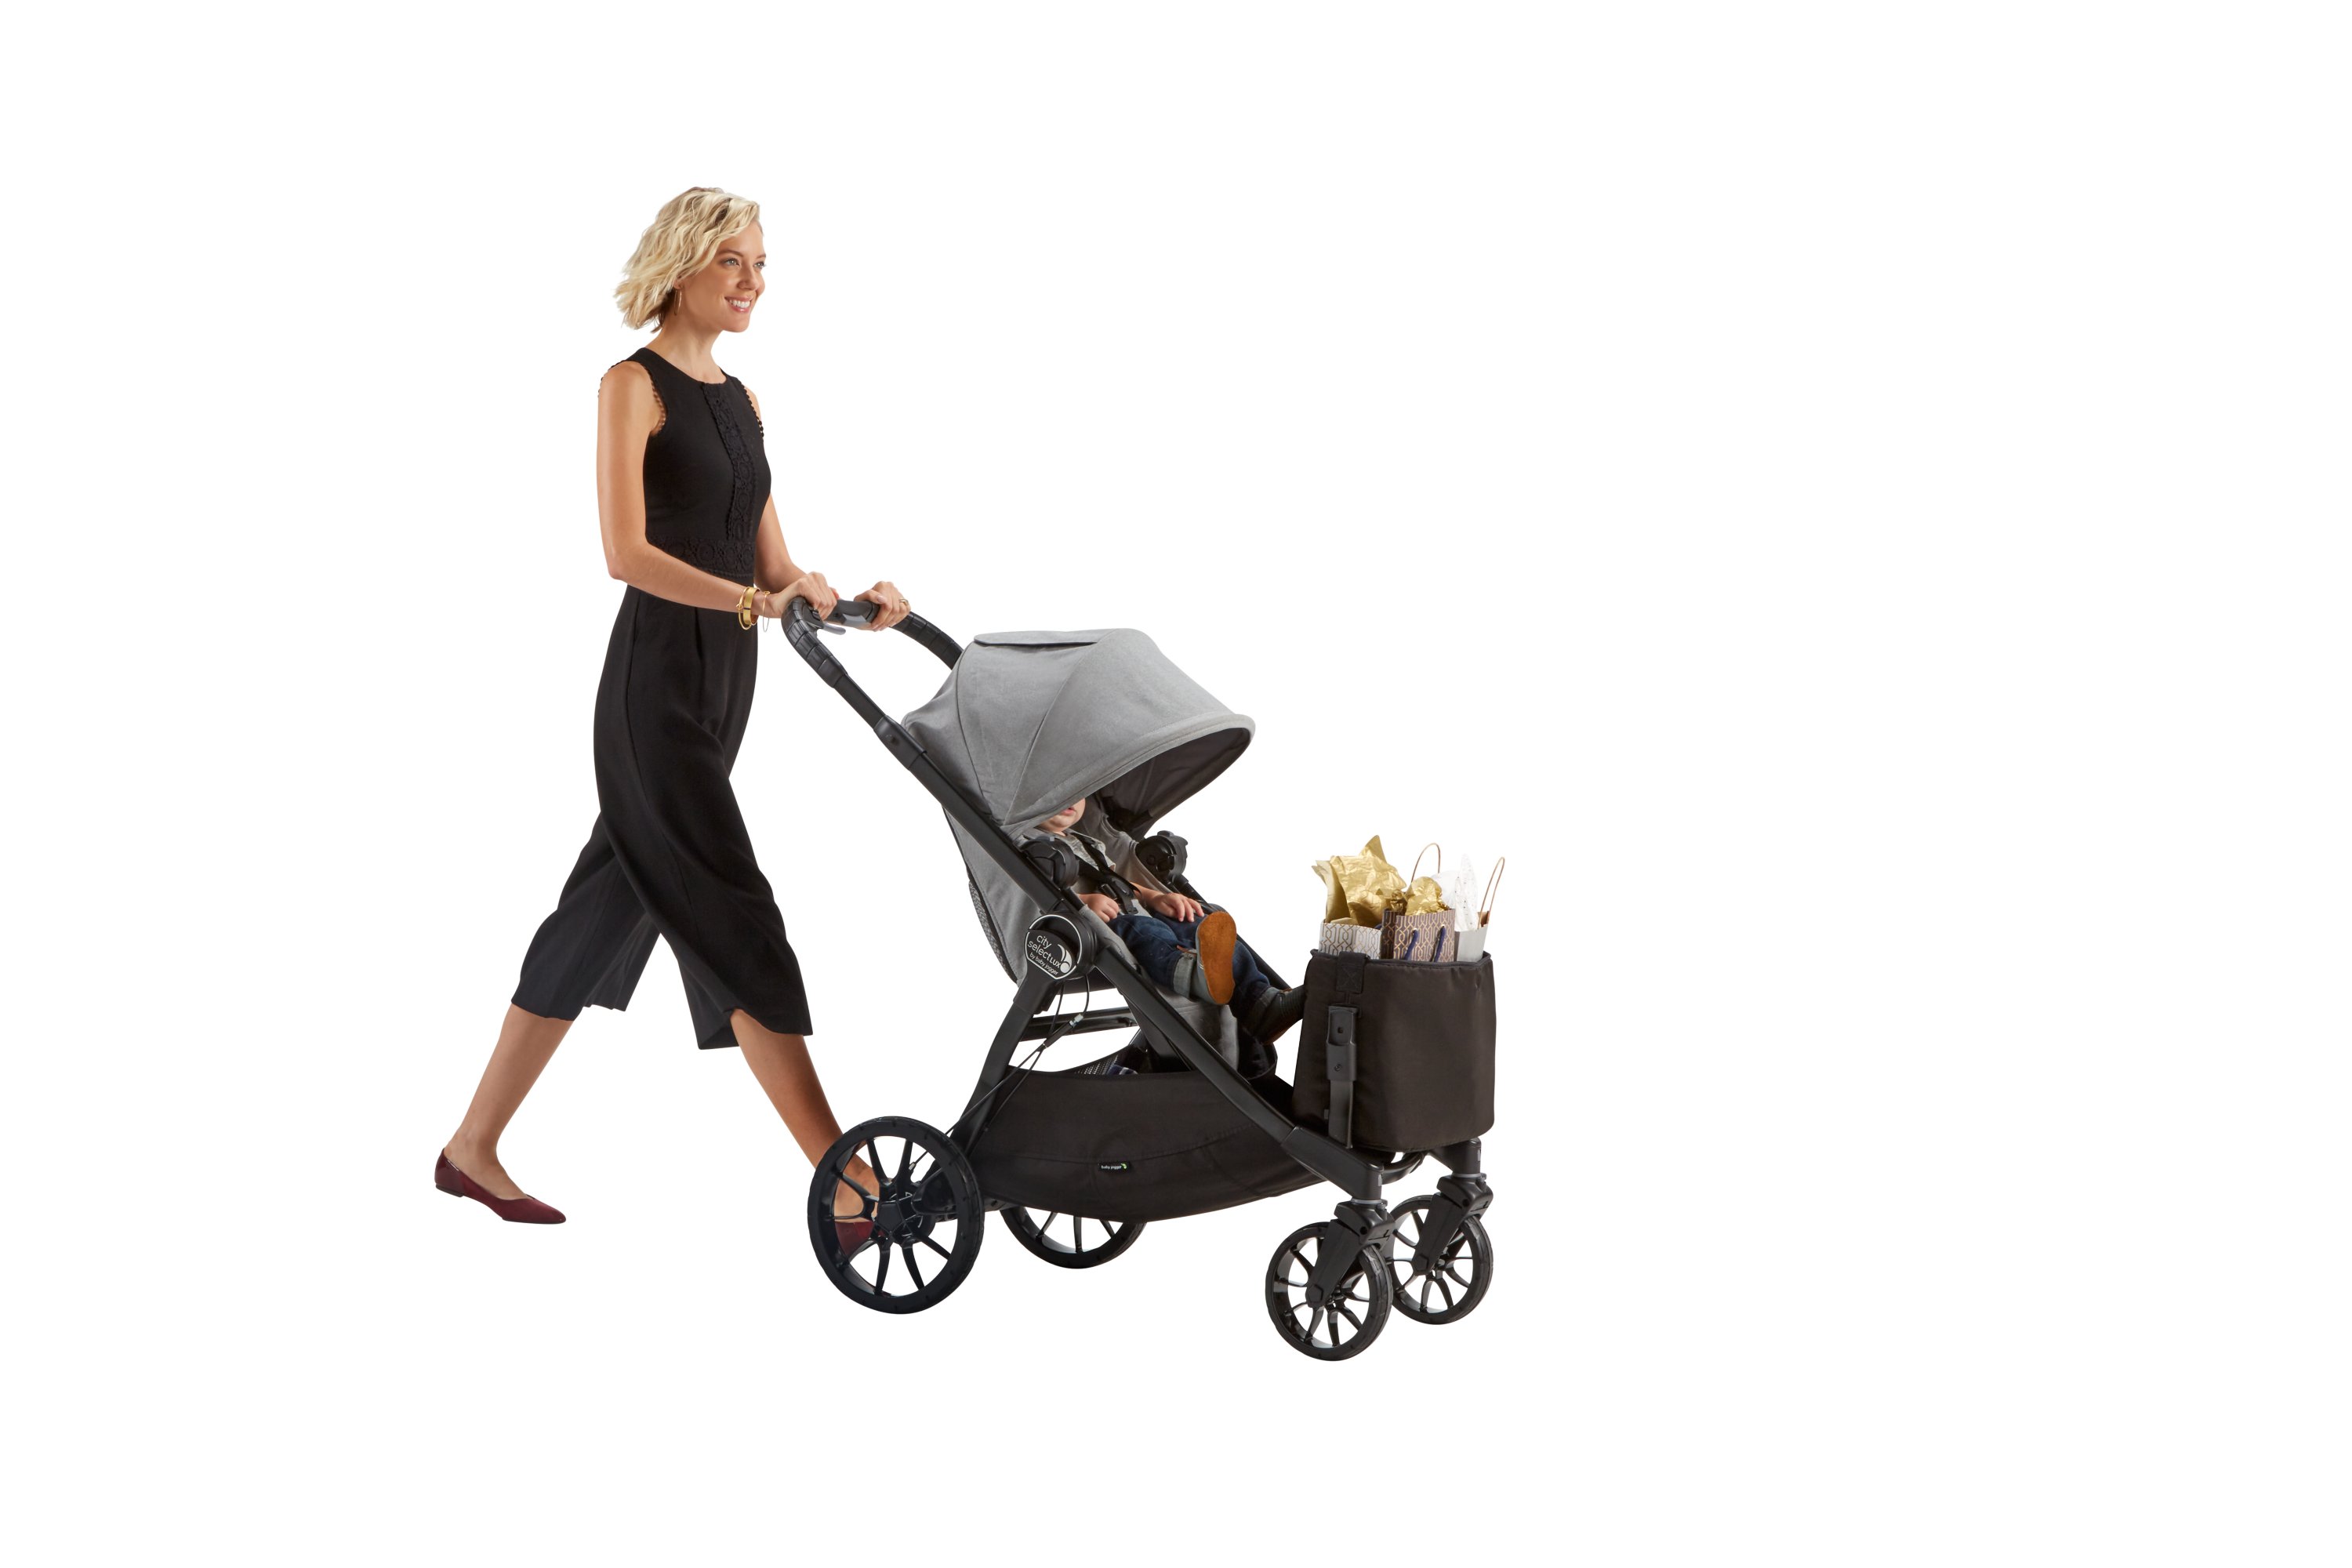 baby jogger basket replacement